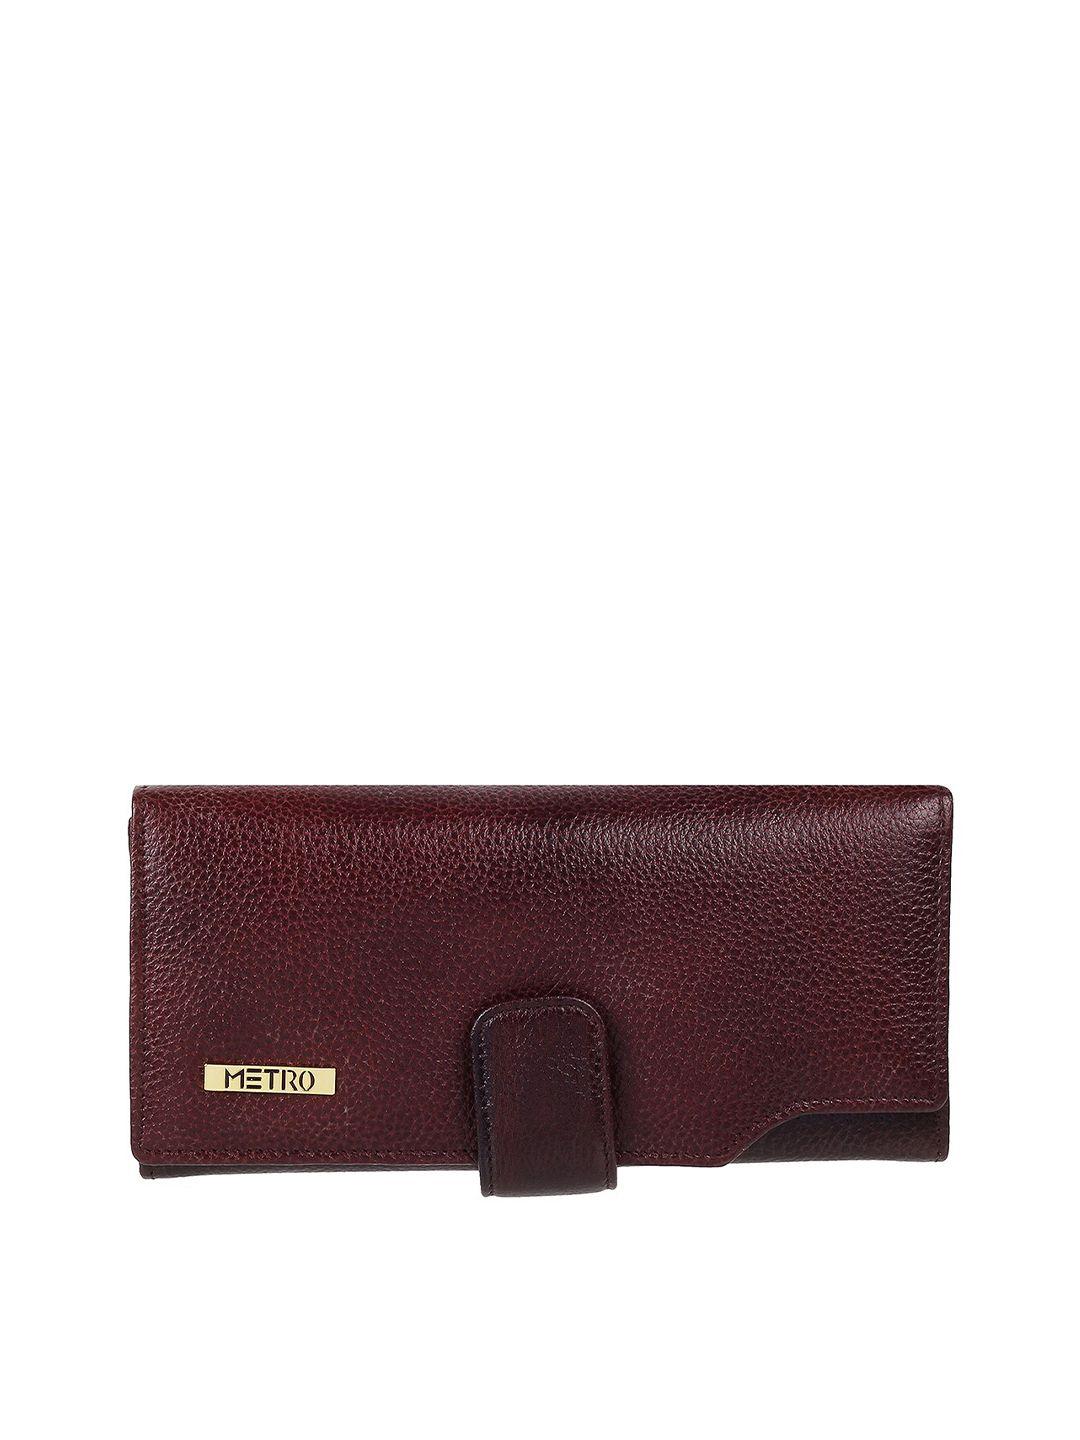 metro women brown textured leather two fold wallet